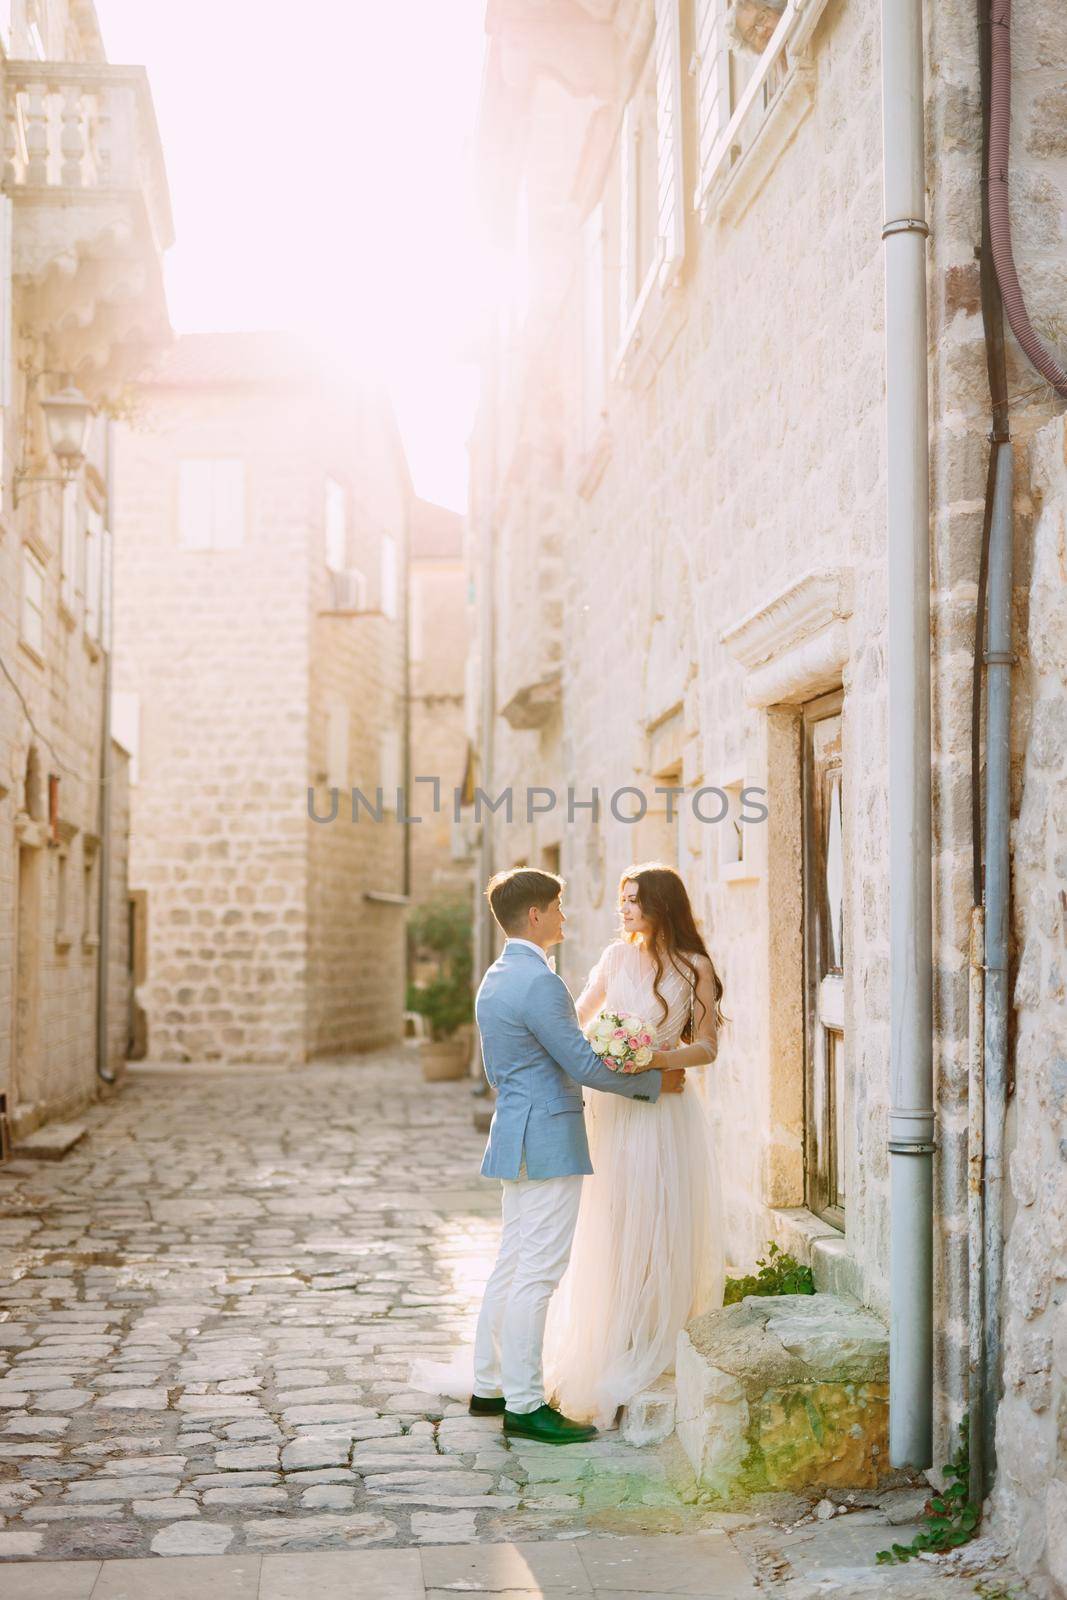 The bride and groom hug on a beautiful old street of Perast near a white stone wall . High quality photo